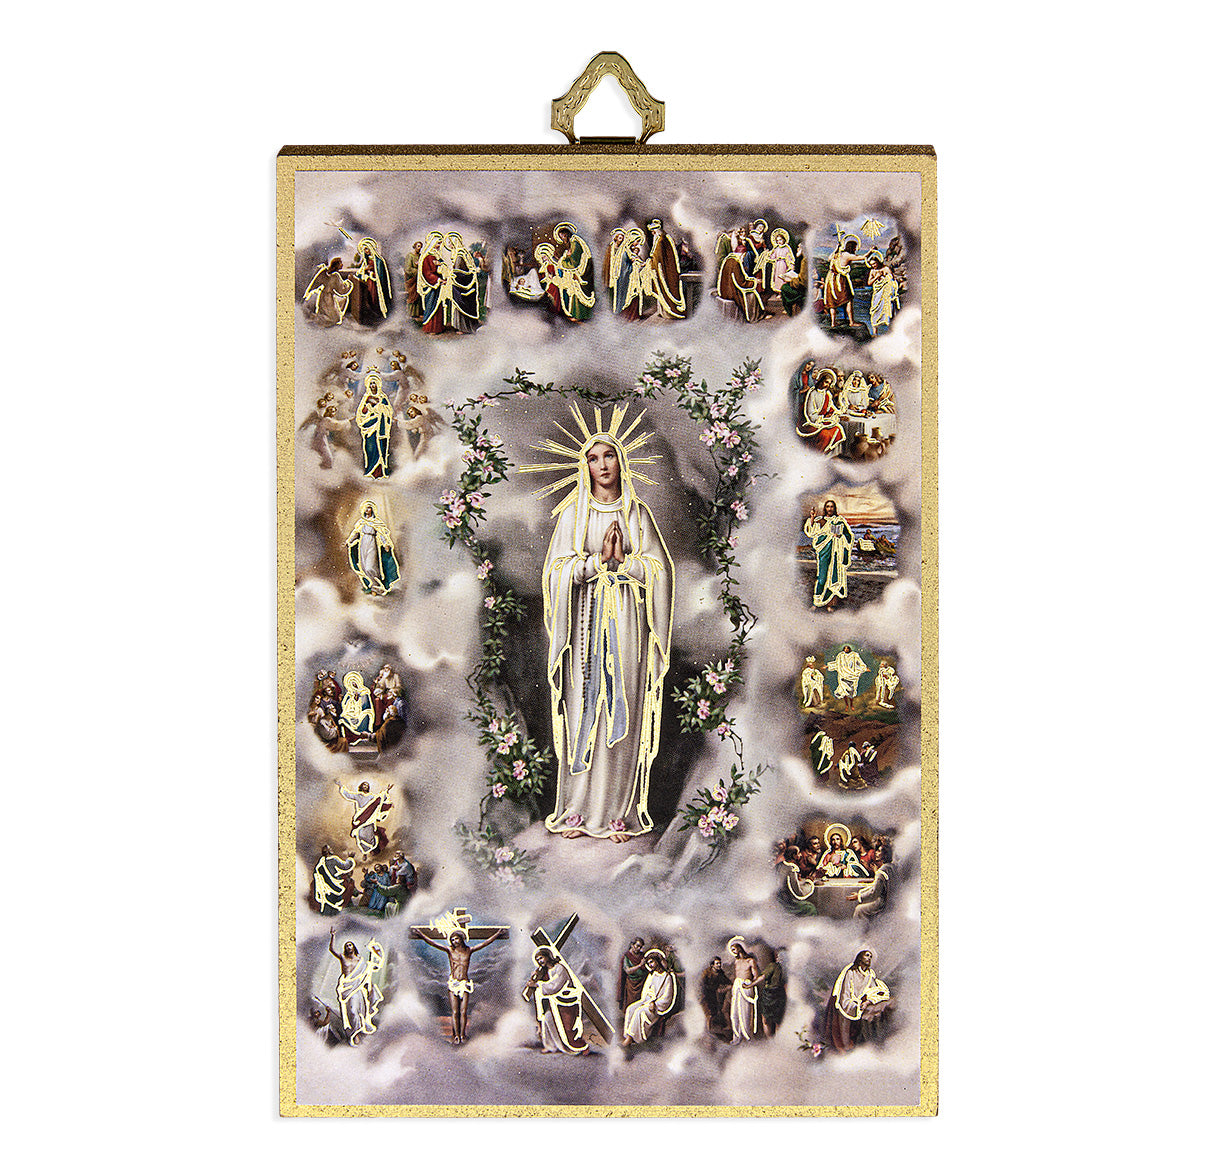 4" x 6" Mystery of the Rosary Gold Foil Mosaic Plaque